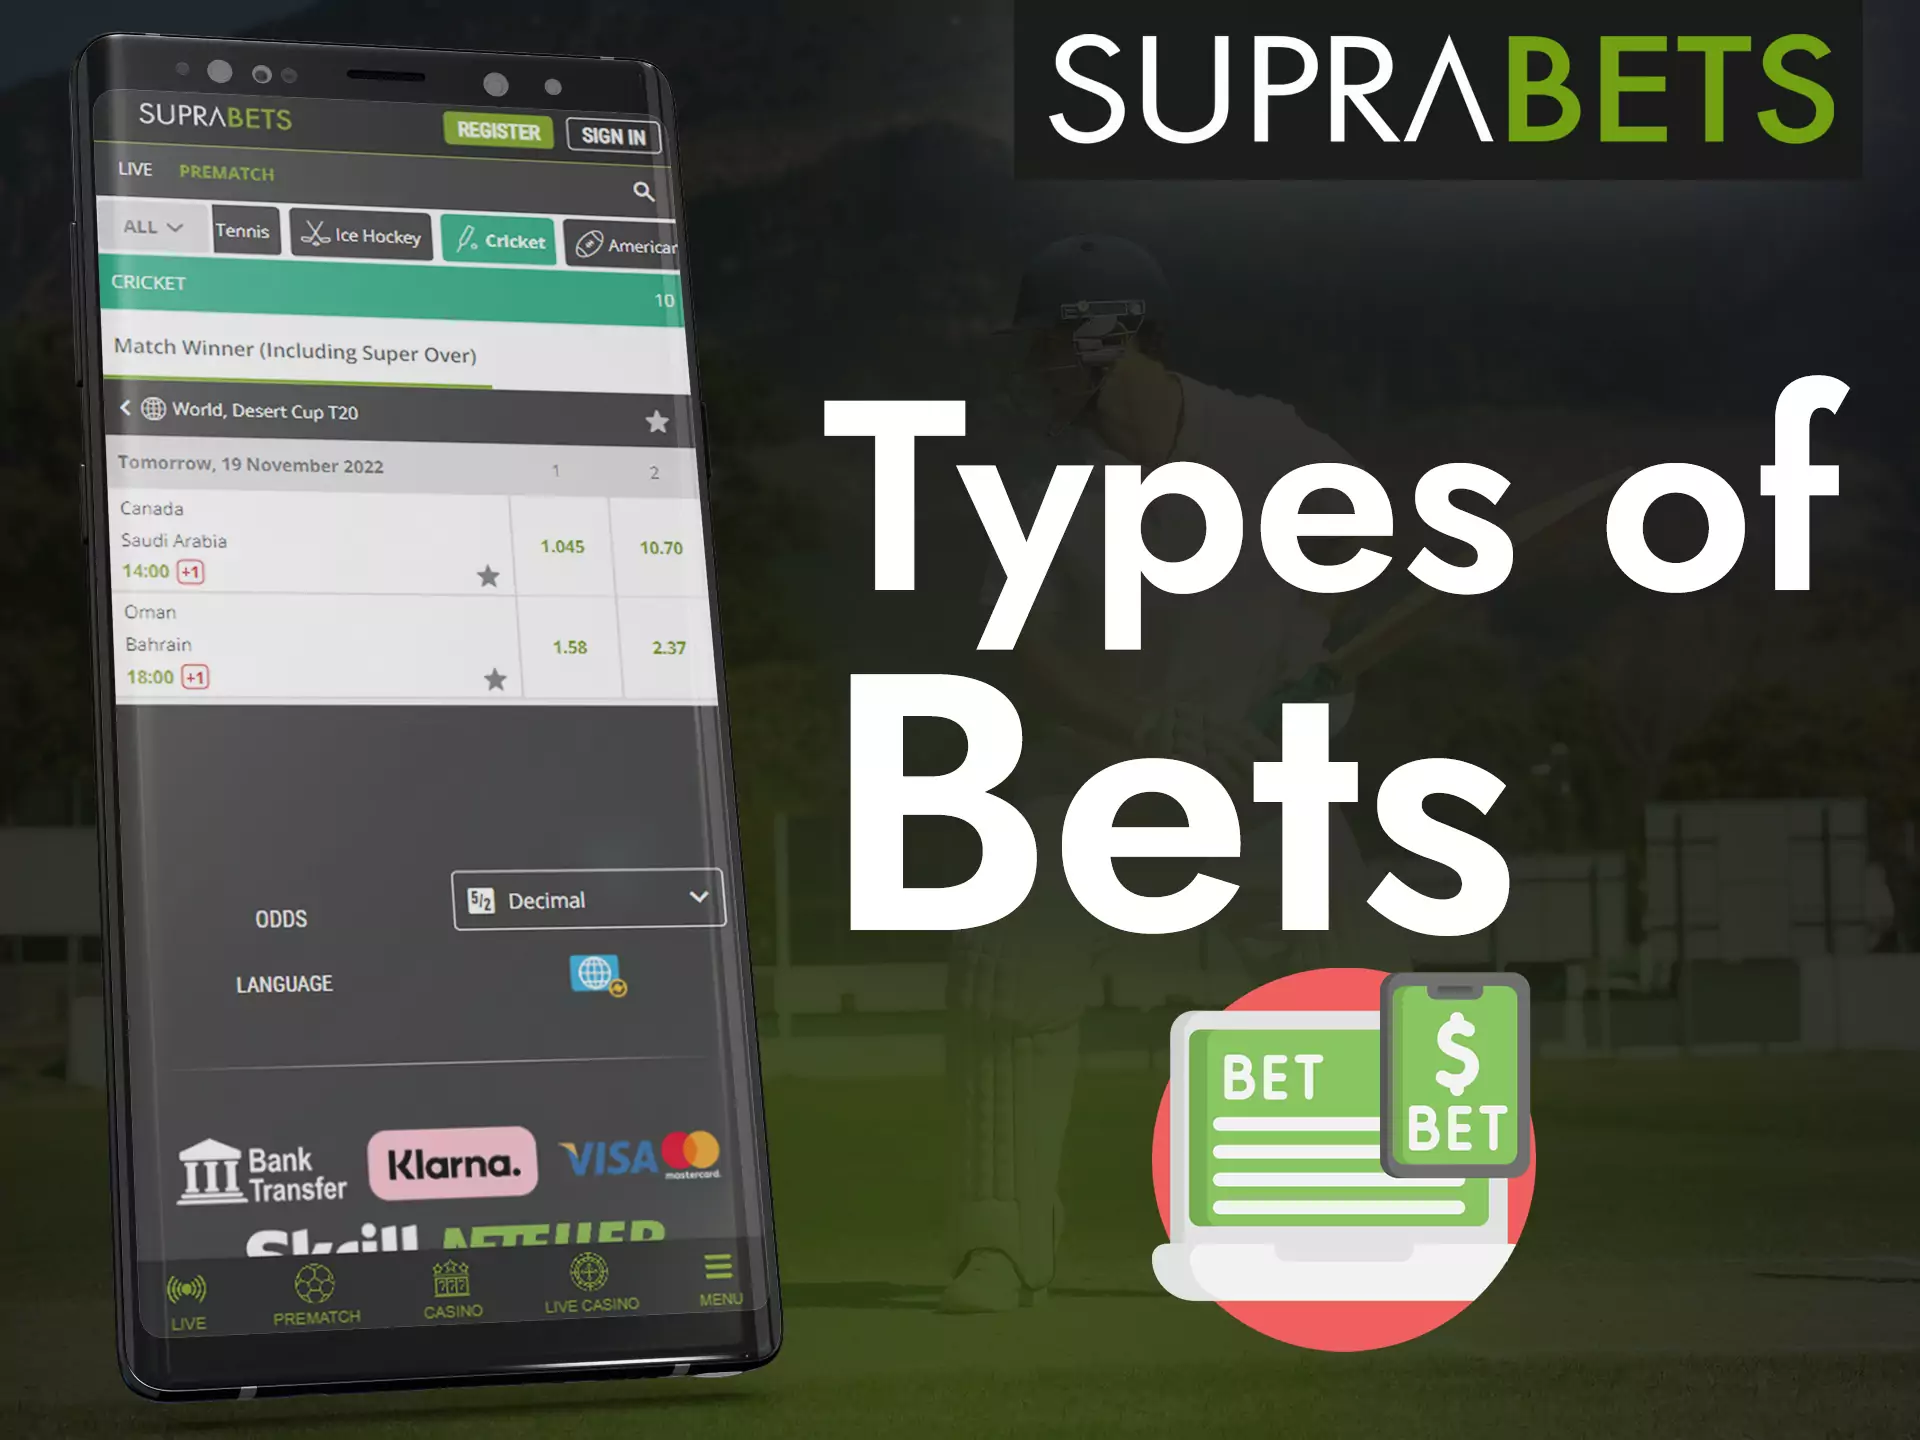 Try all types of betting on your favorite sports with Suprabets.